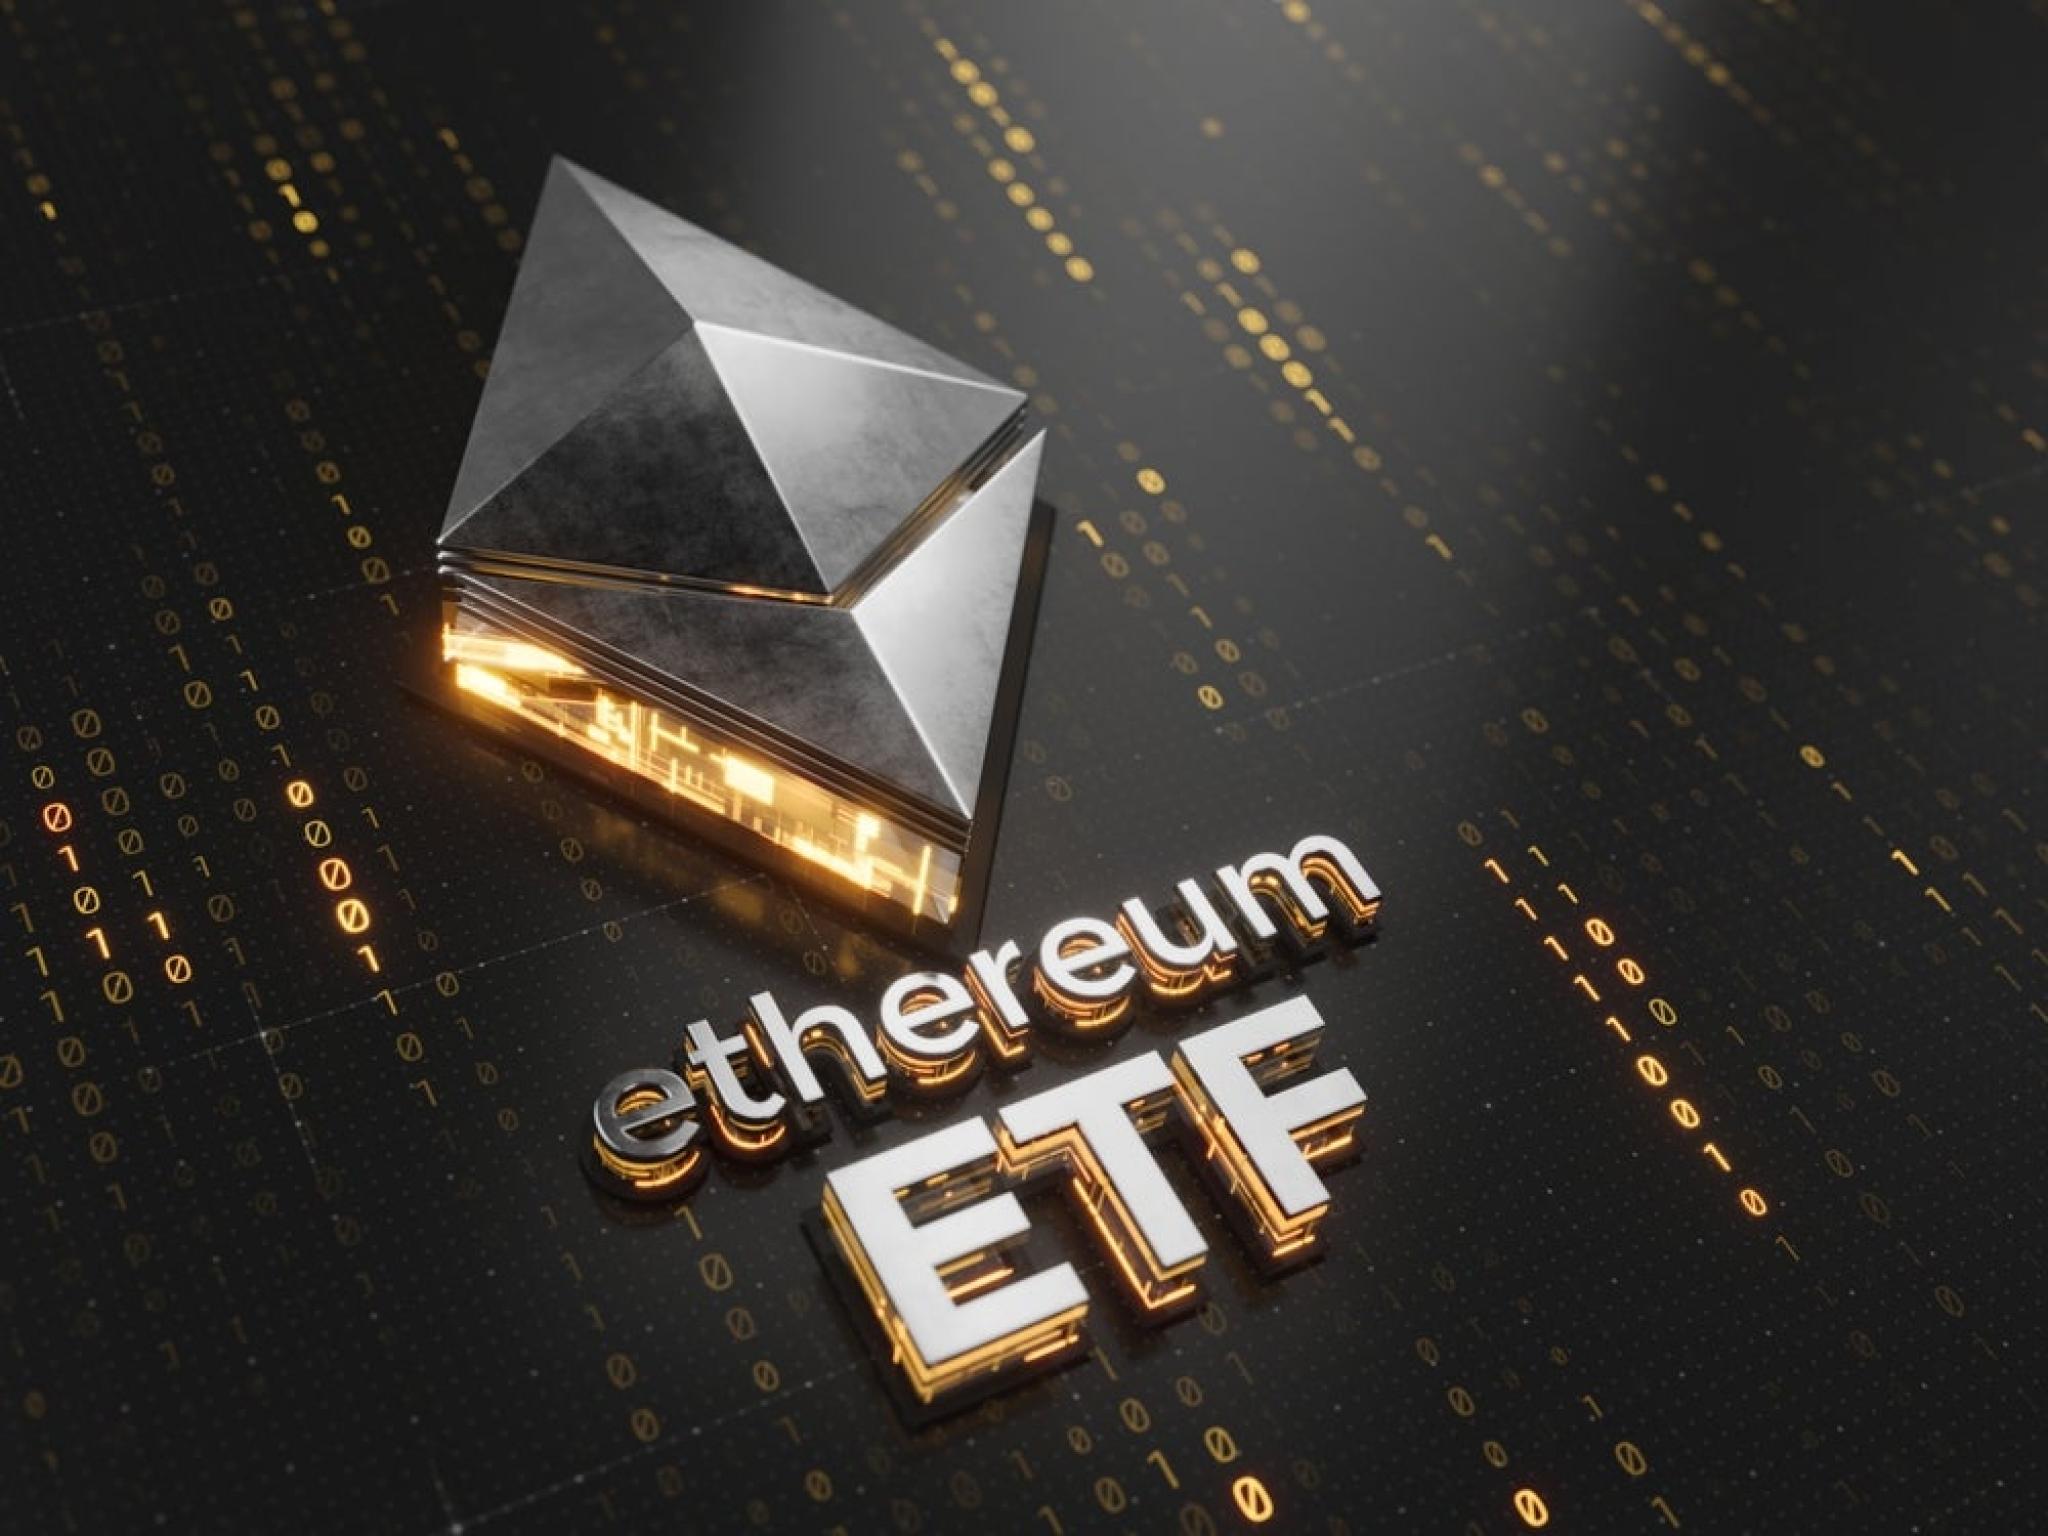  ethereum-etf-what-eth-price-impact-to-expect 